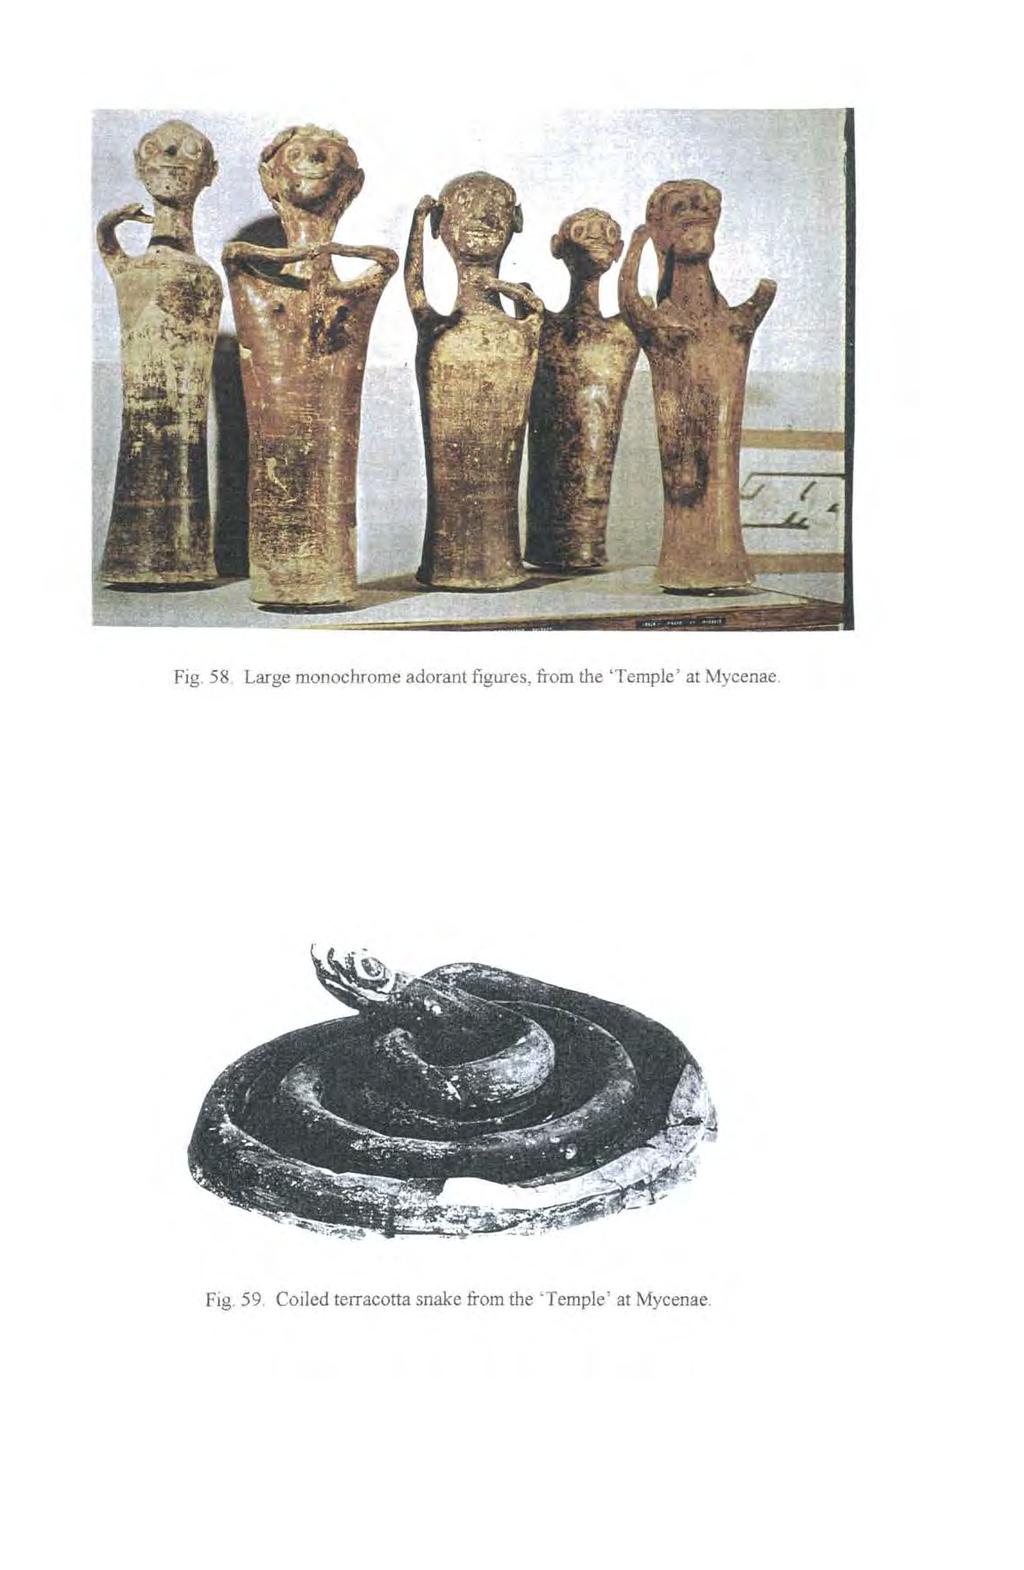 Fig. 58 Large monochrome adorant figures, from the 'Temple' at